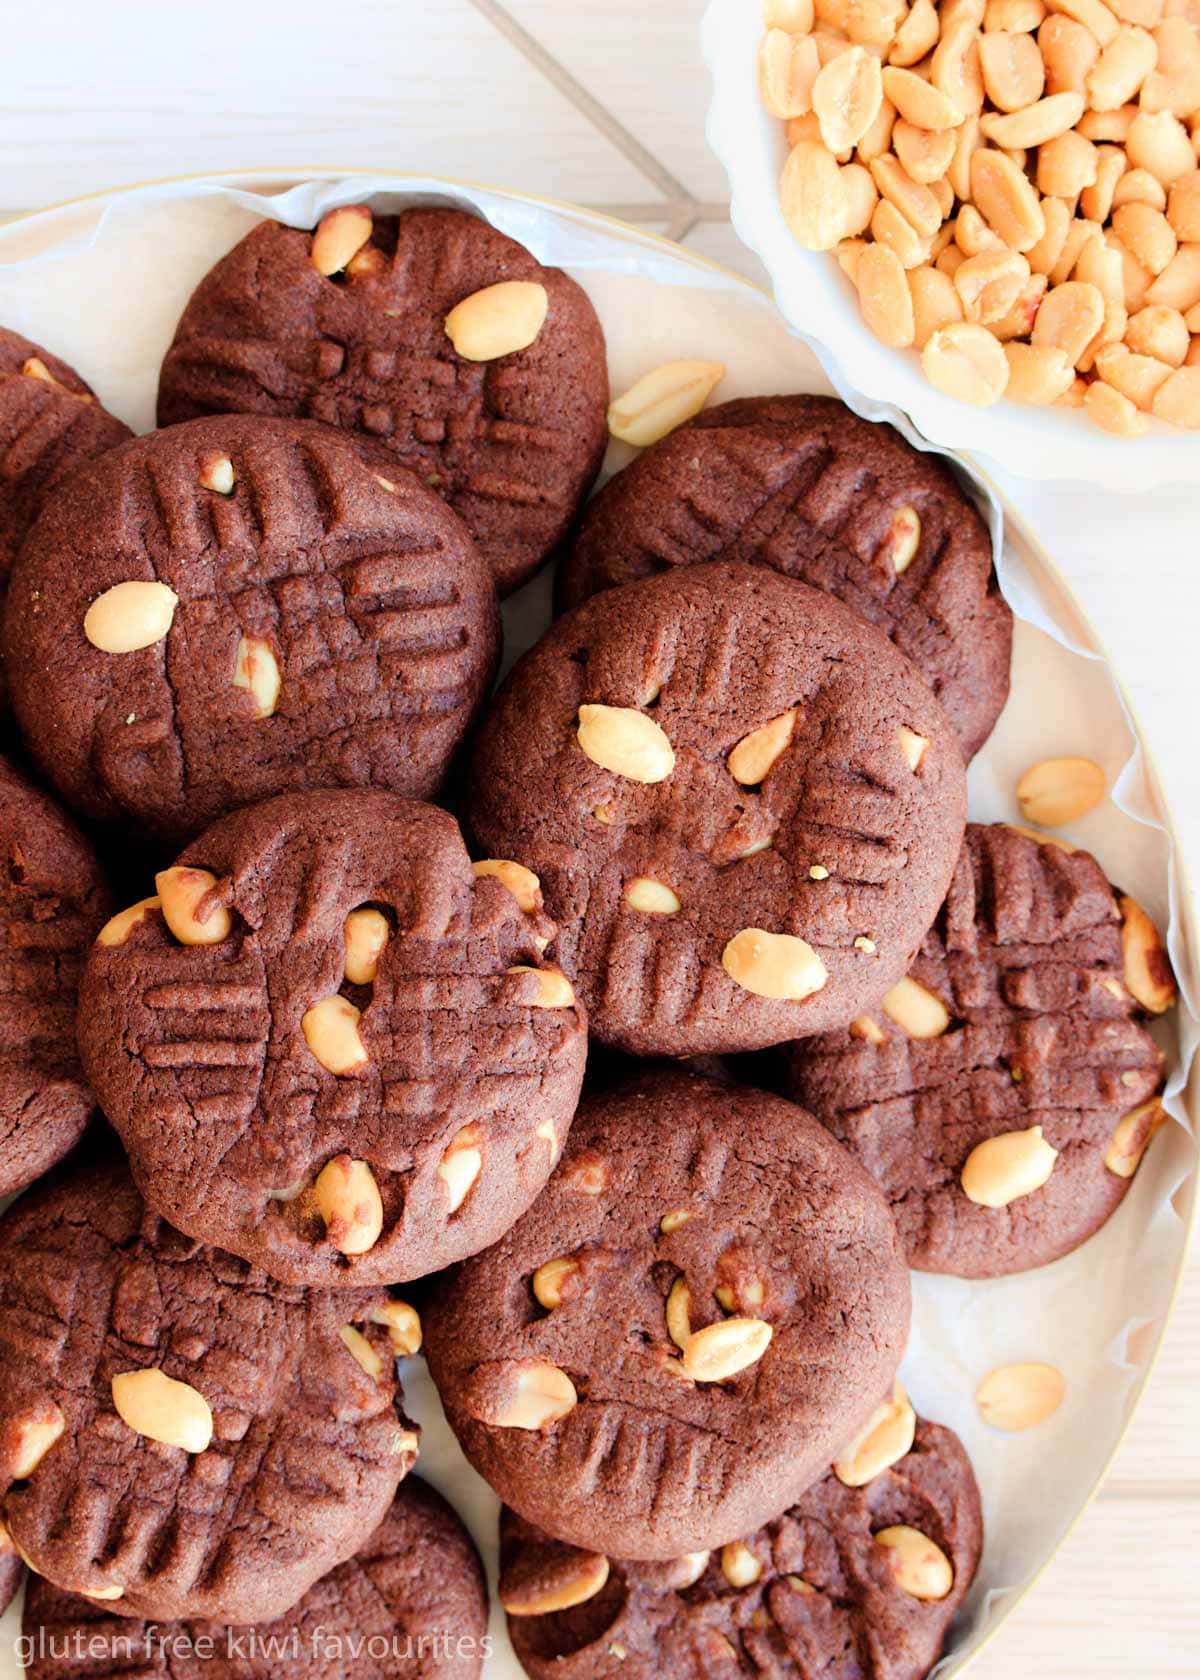 Gluten free peanut brownie biscuits piled on a round plate with a small bowl of peanuts.